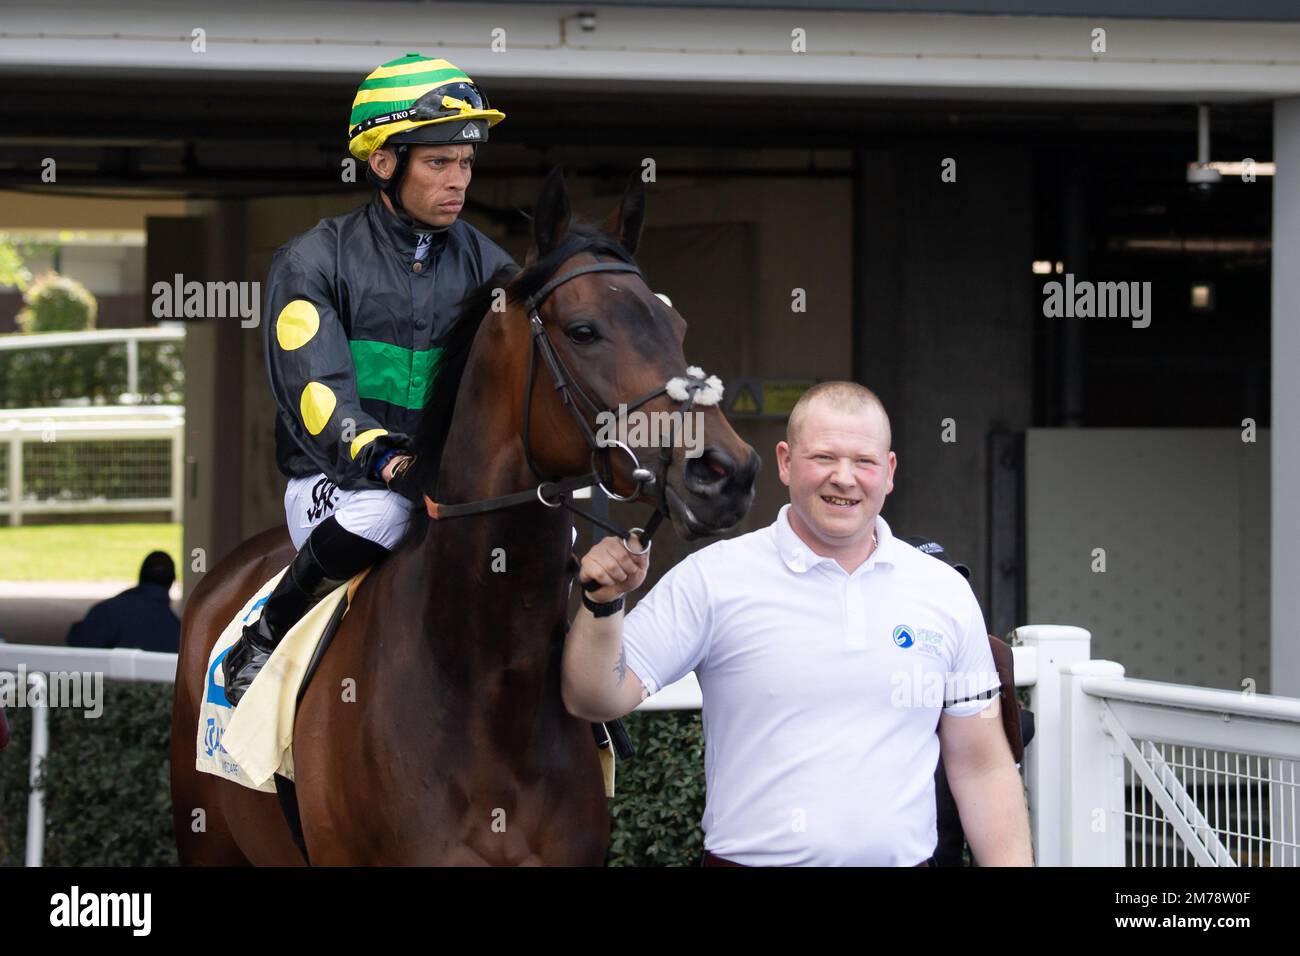 Ascot, Berkshire, UK. 7th May, 2022. Horse Mandoob ridden by jockey Sean Levey head out onto the racetrack for the Carey Group Buckhounds Stakes at Ascot Racecourse. Credit: Maureen McLean/Alamy Stock Photo